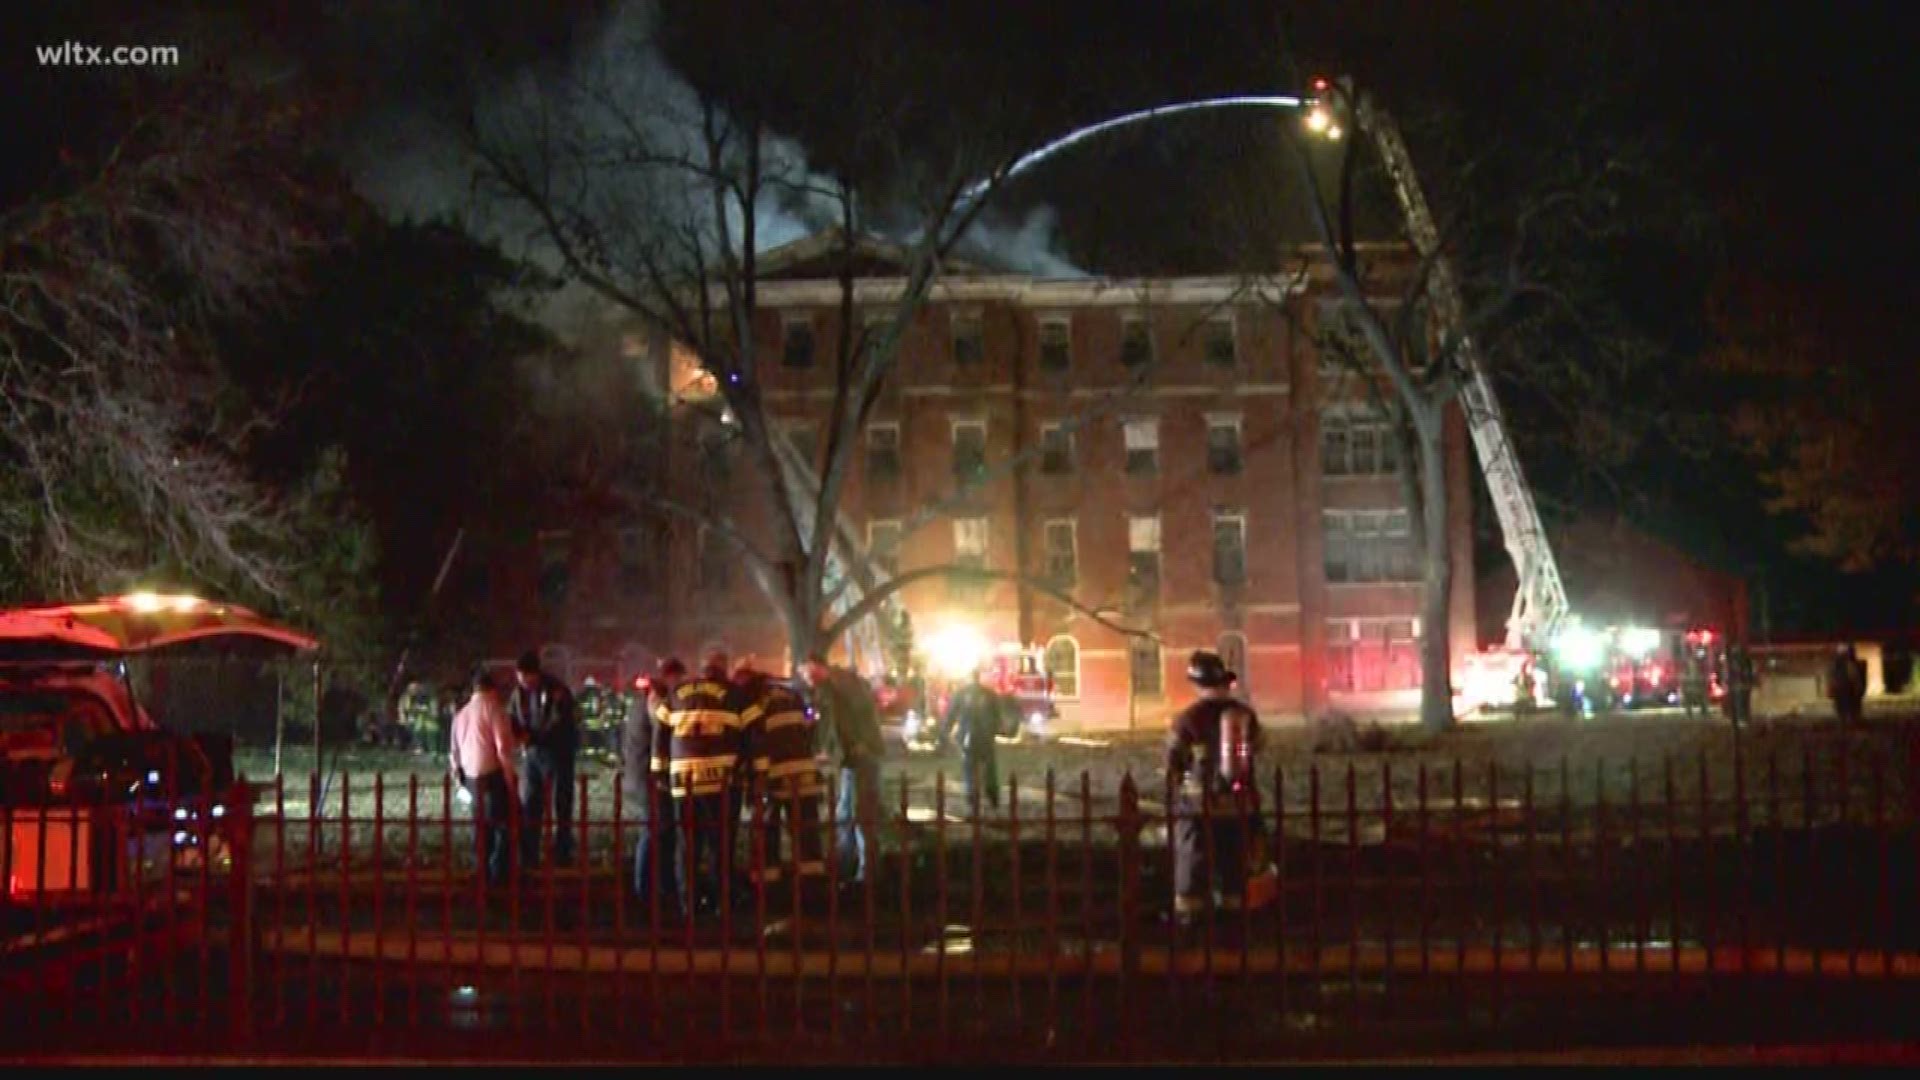 Columbia fire fighters work on fighting fire at the historic Babcock building